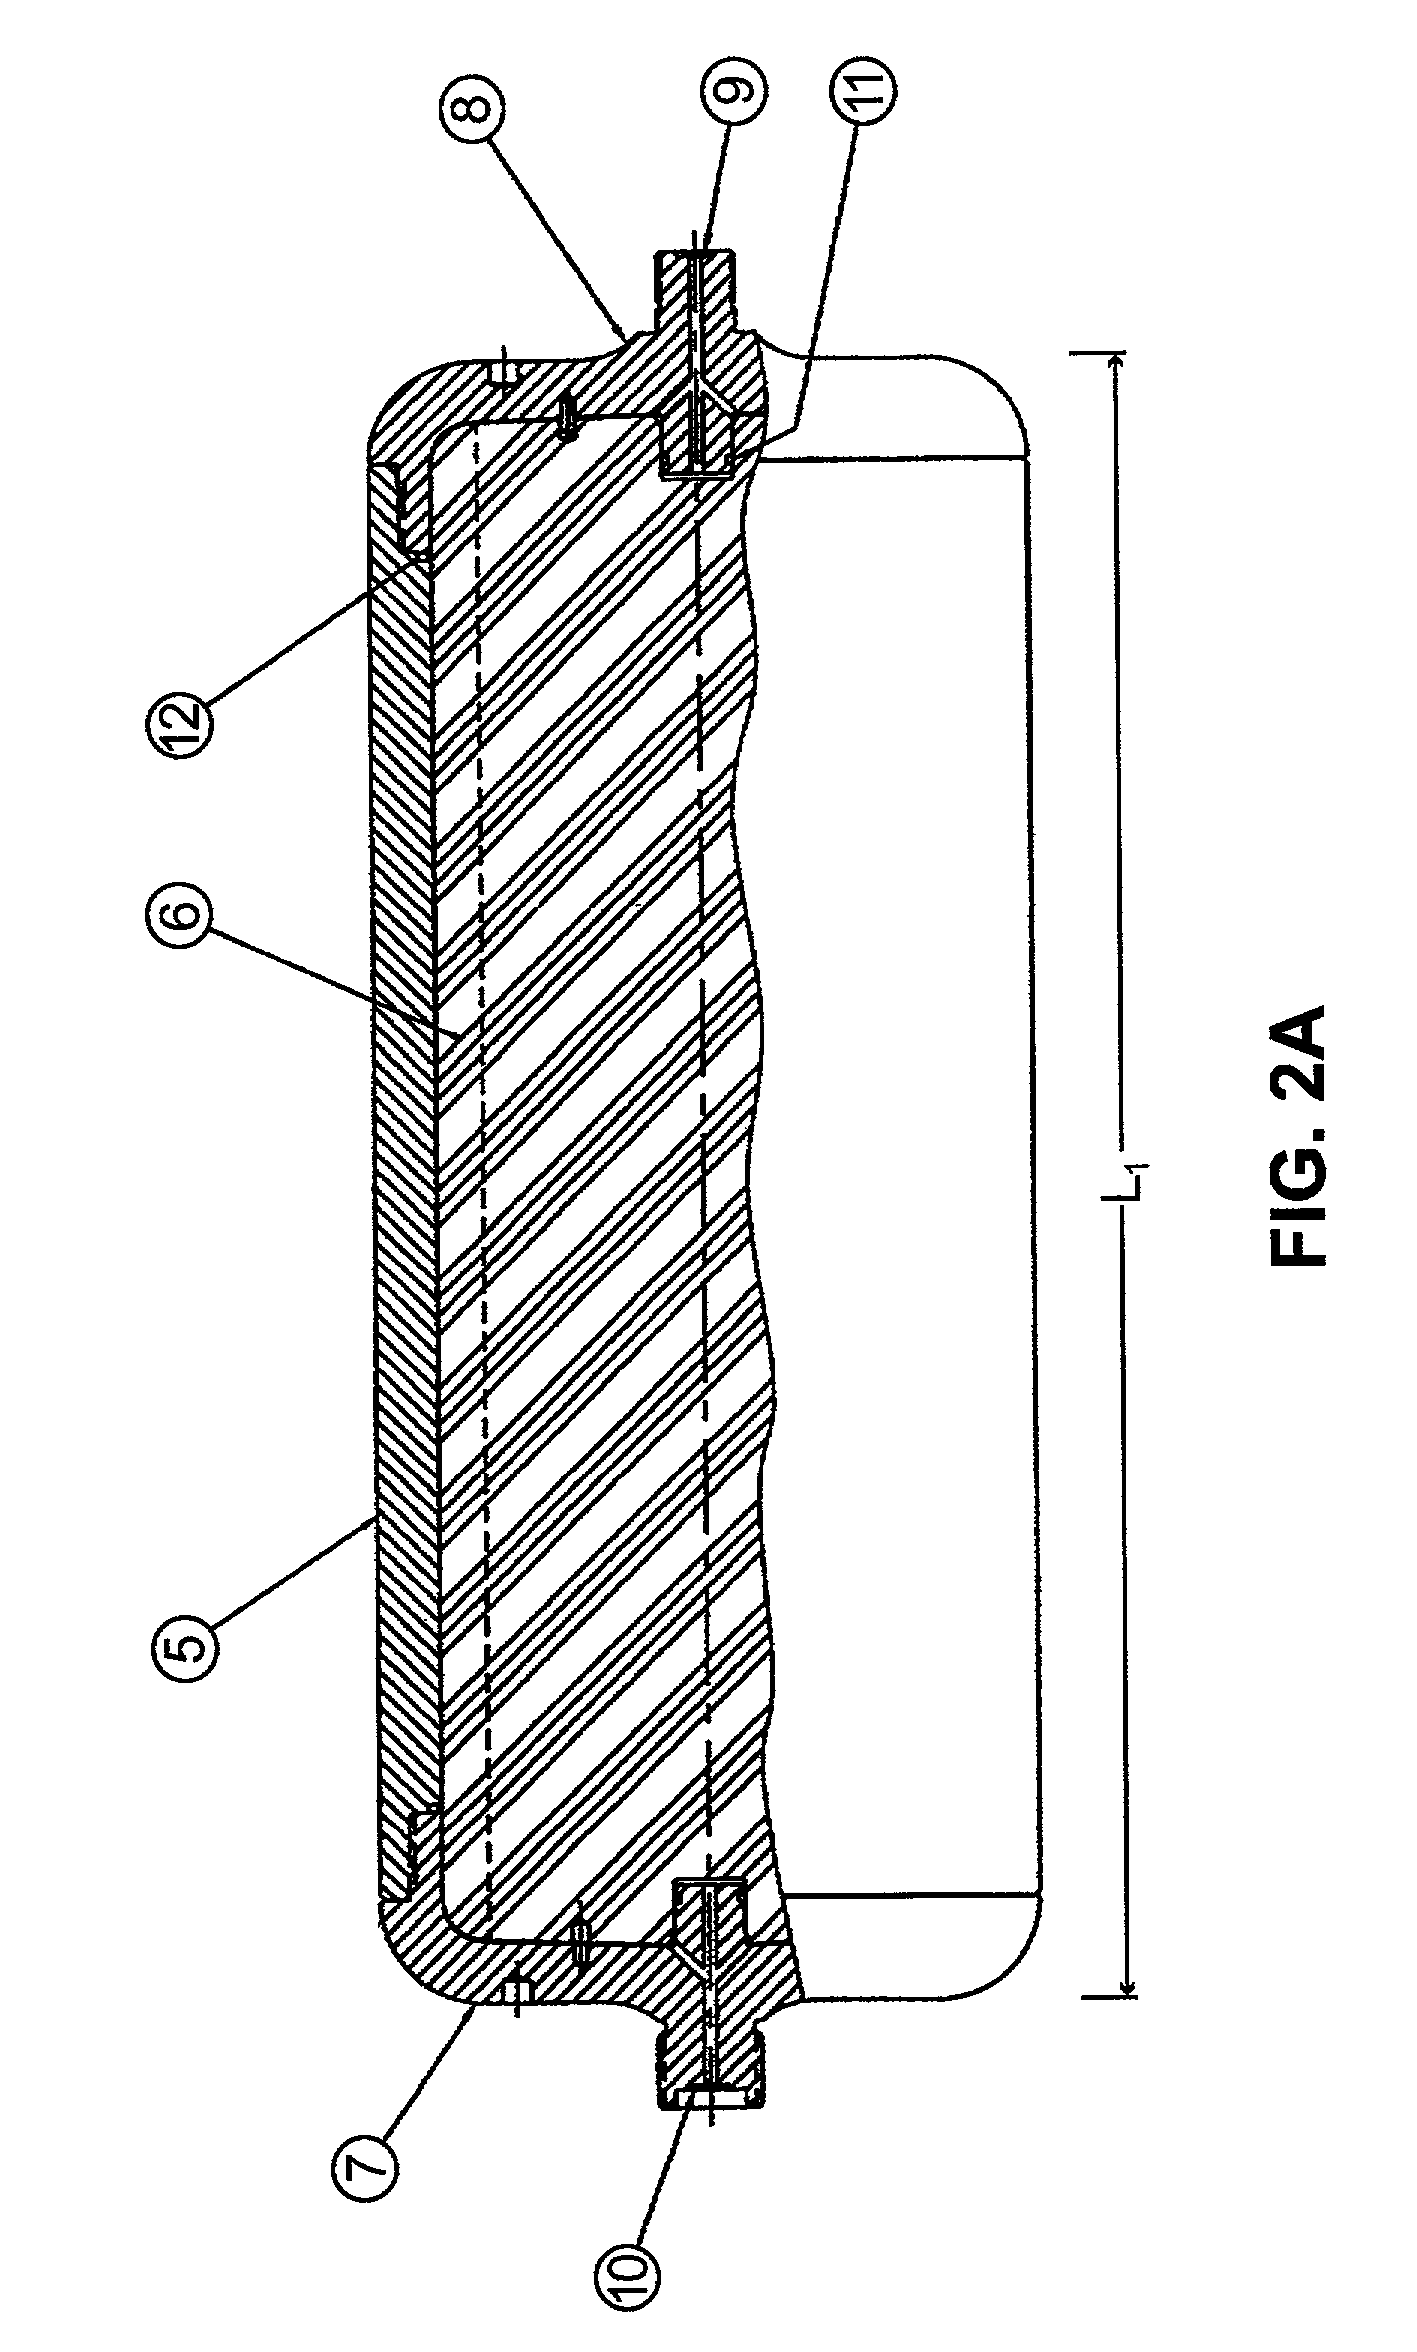 Centrifuge with removable core for scalable centrifugation